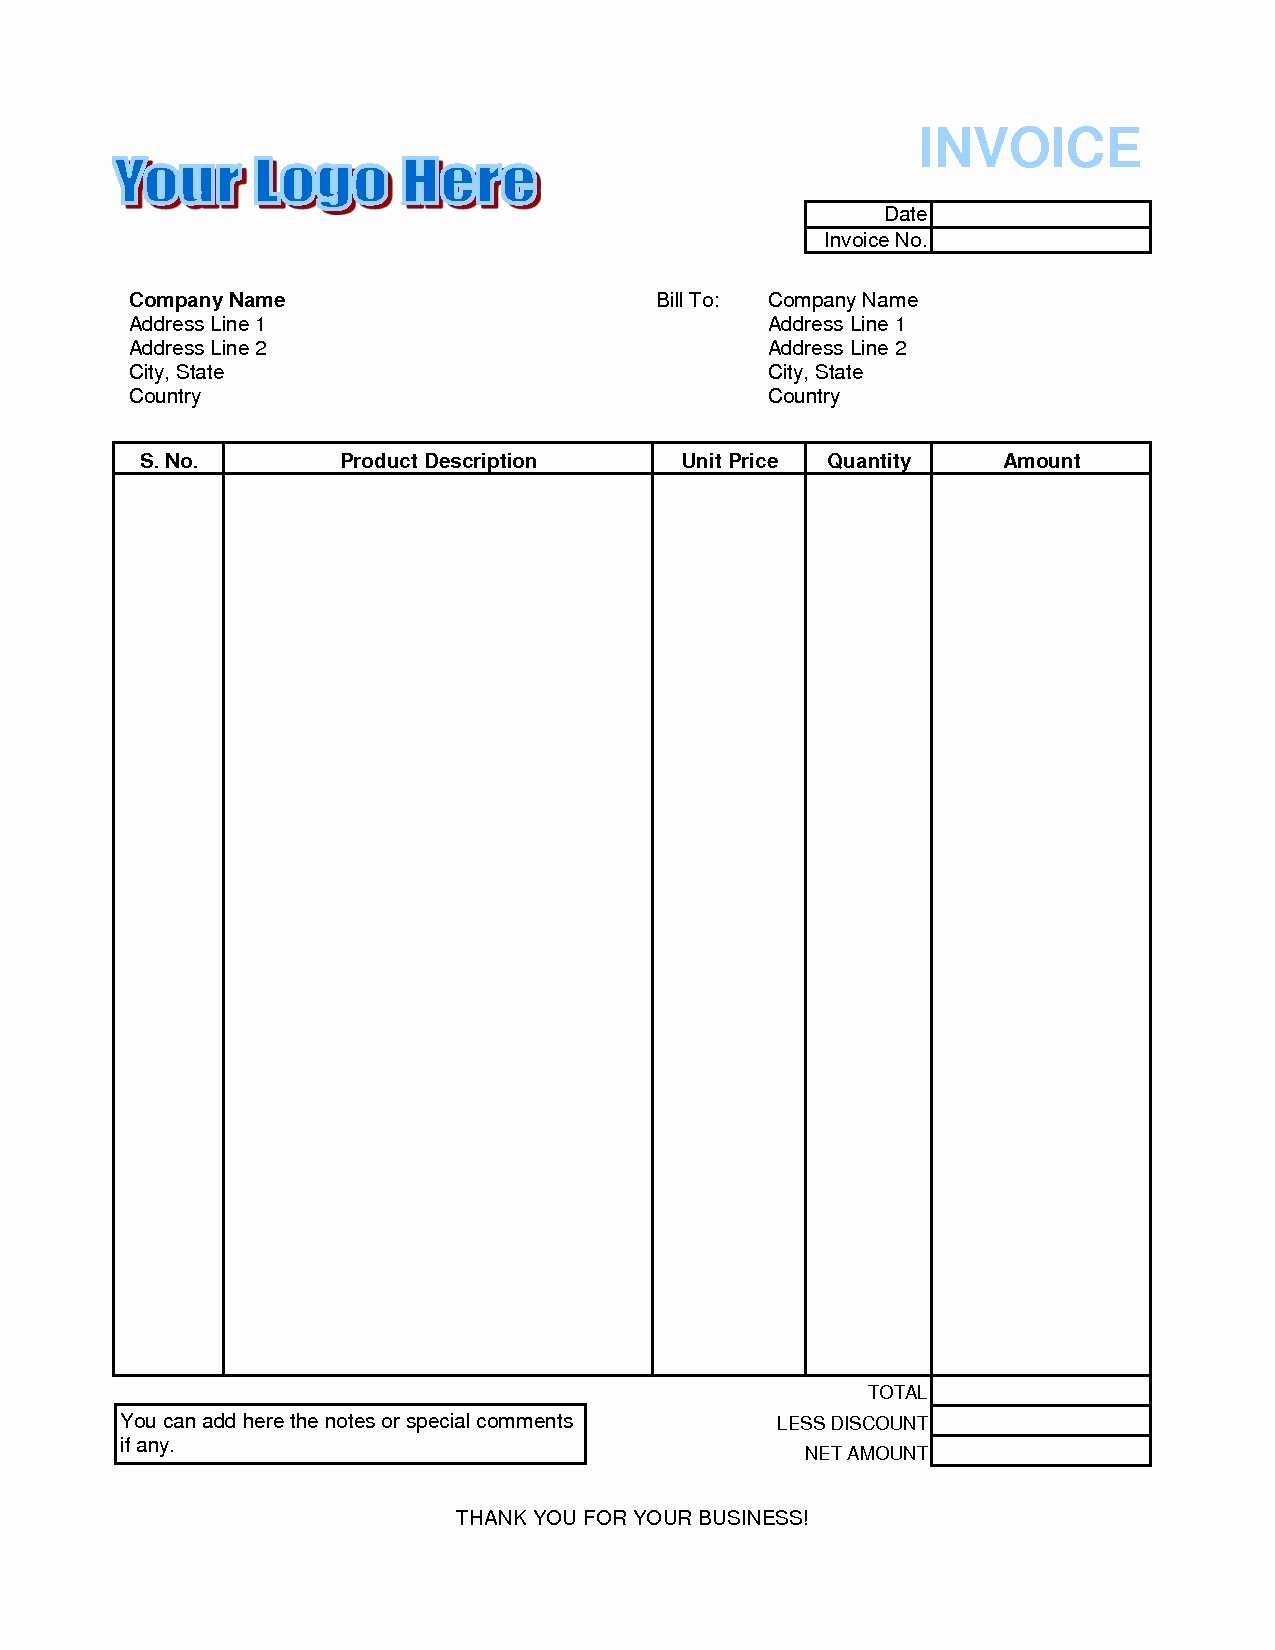 Invoice format In Excel Sheet Free Download